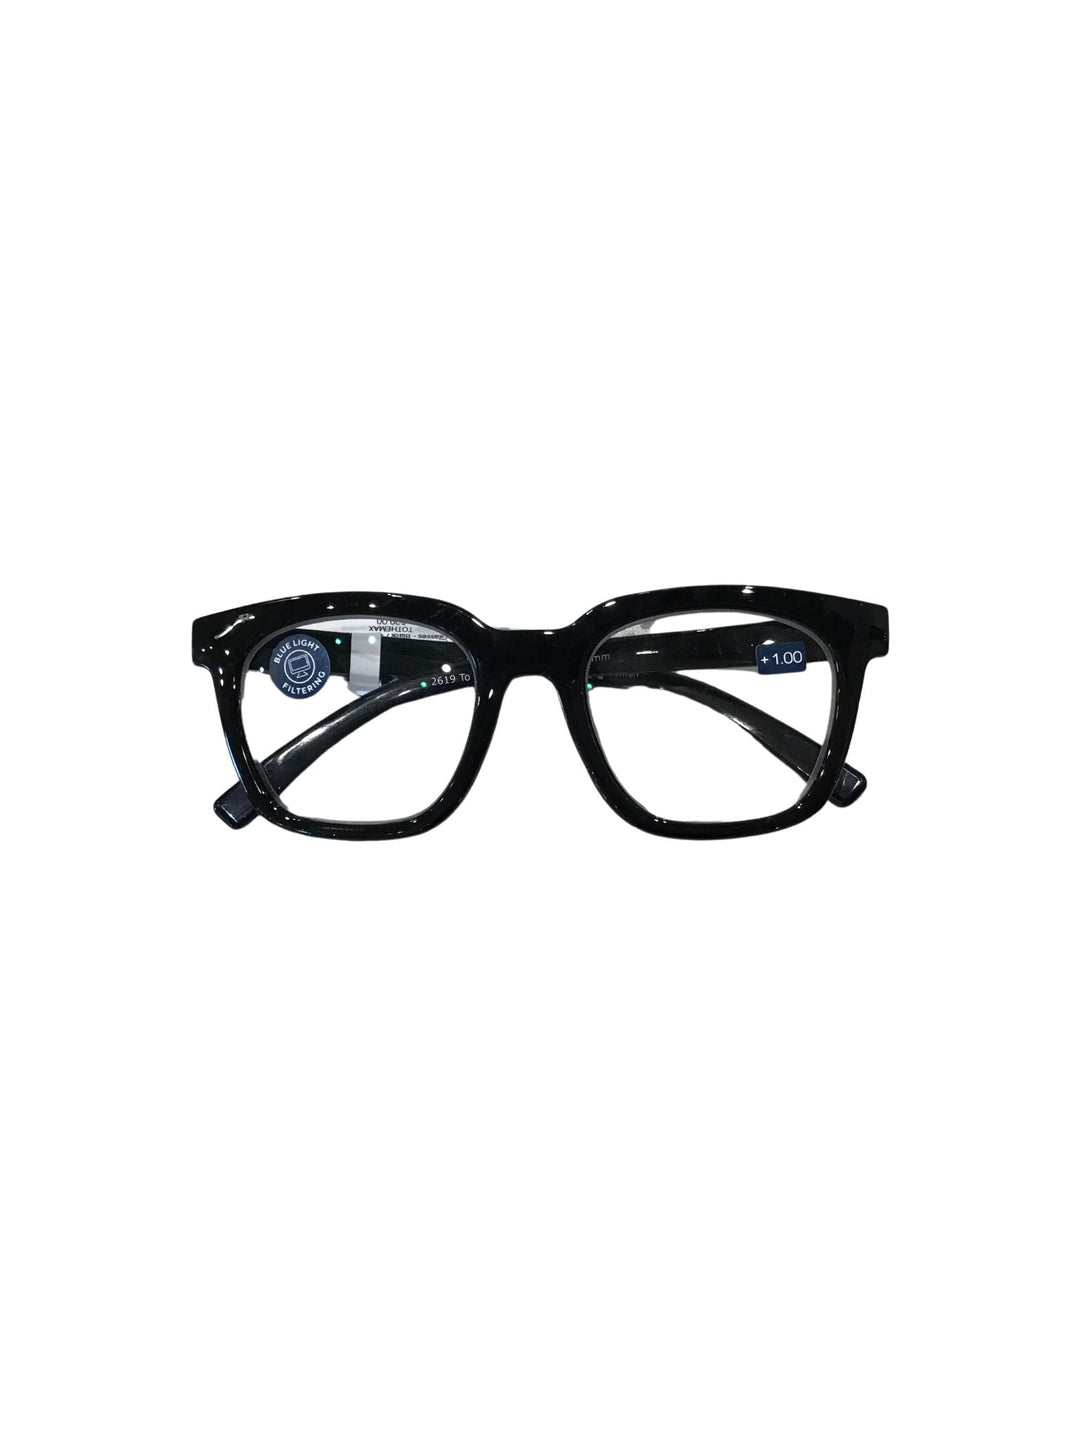 Peepers-Peepers To The Max Blue Light Reading Glasses - Black - Leela and Lavender